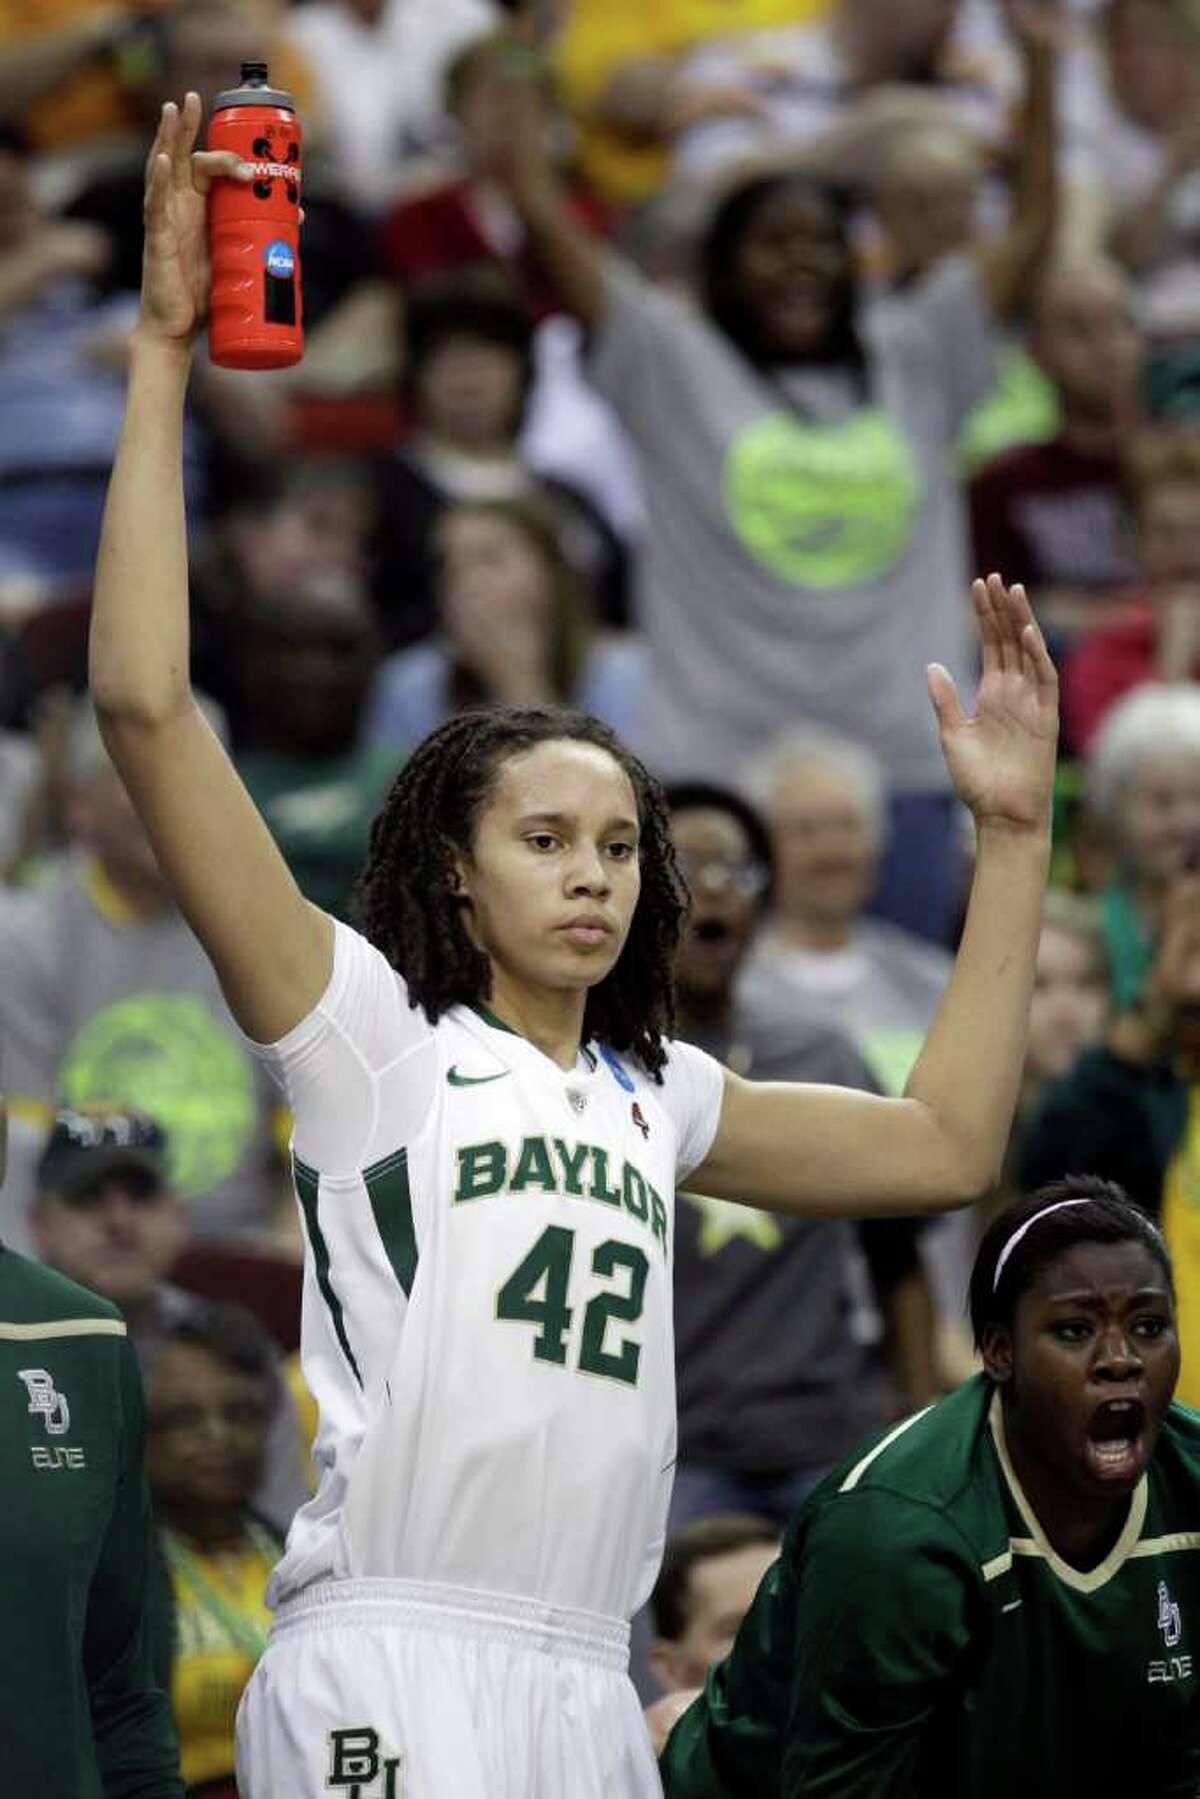 Baylor center Brittney Griner reacts on the bench during the first half of an NCAA women's tournament regional semifinal college basketball game against Georgia Tech, Saturday, March 24, 2012, in Des Moines, Iowa. (AP Photo/Charlie Neibergall)